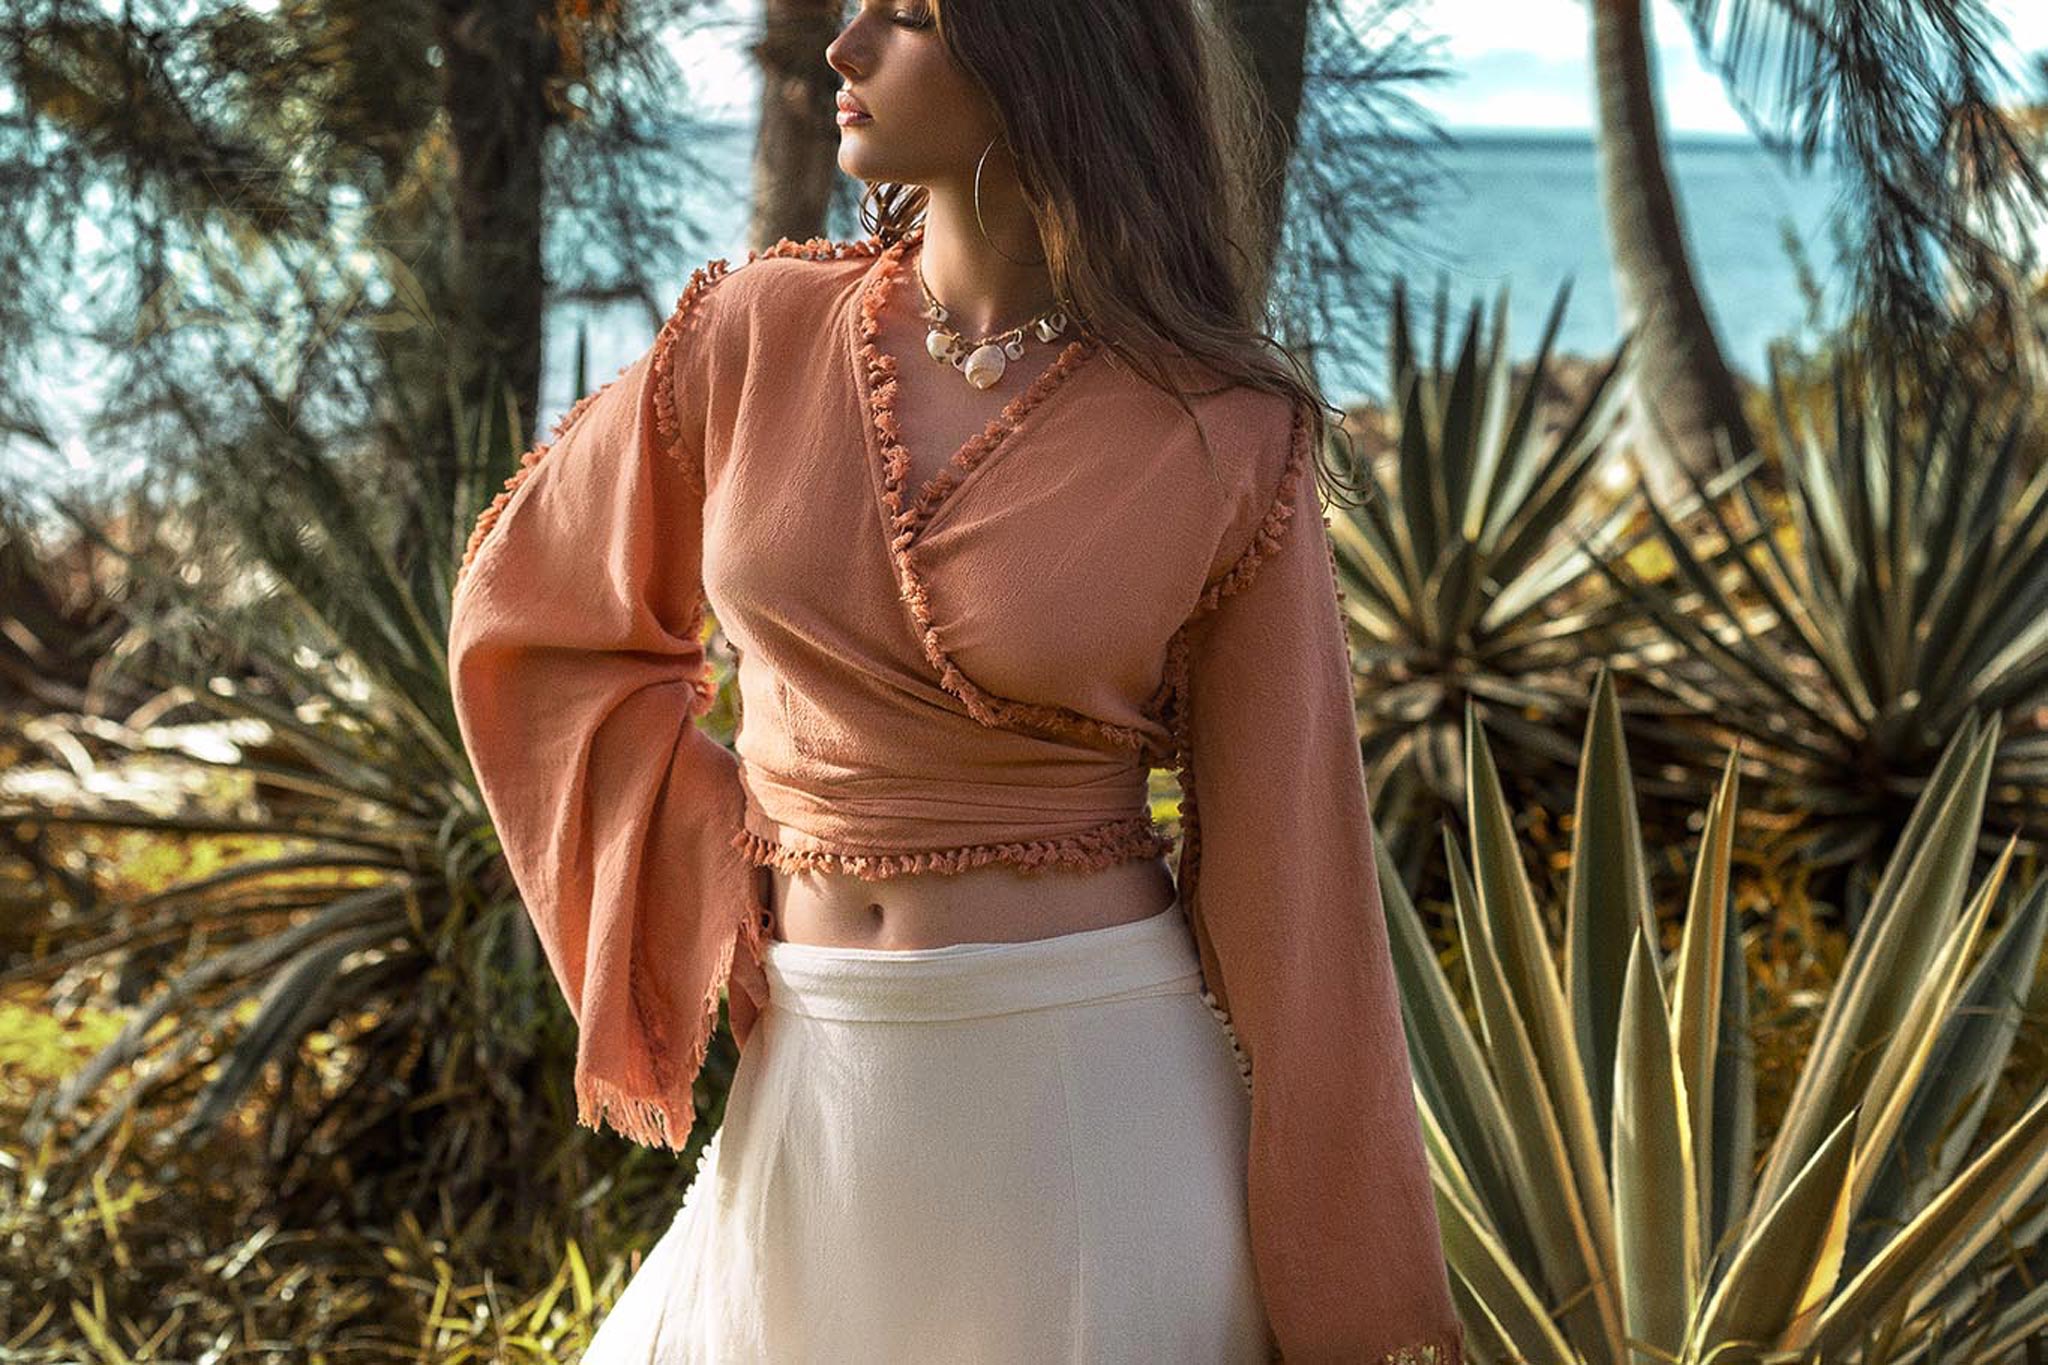 Ochre Pale Orange Boho Top this top is a beautiful ochre color with pale orange accents. It's a great boho style top with wide sleeves and decorated with hand knots. This top would look great with any outfit!